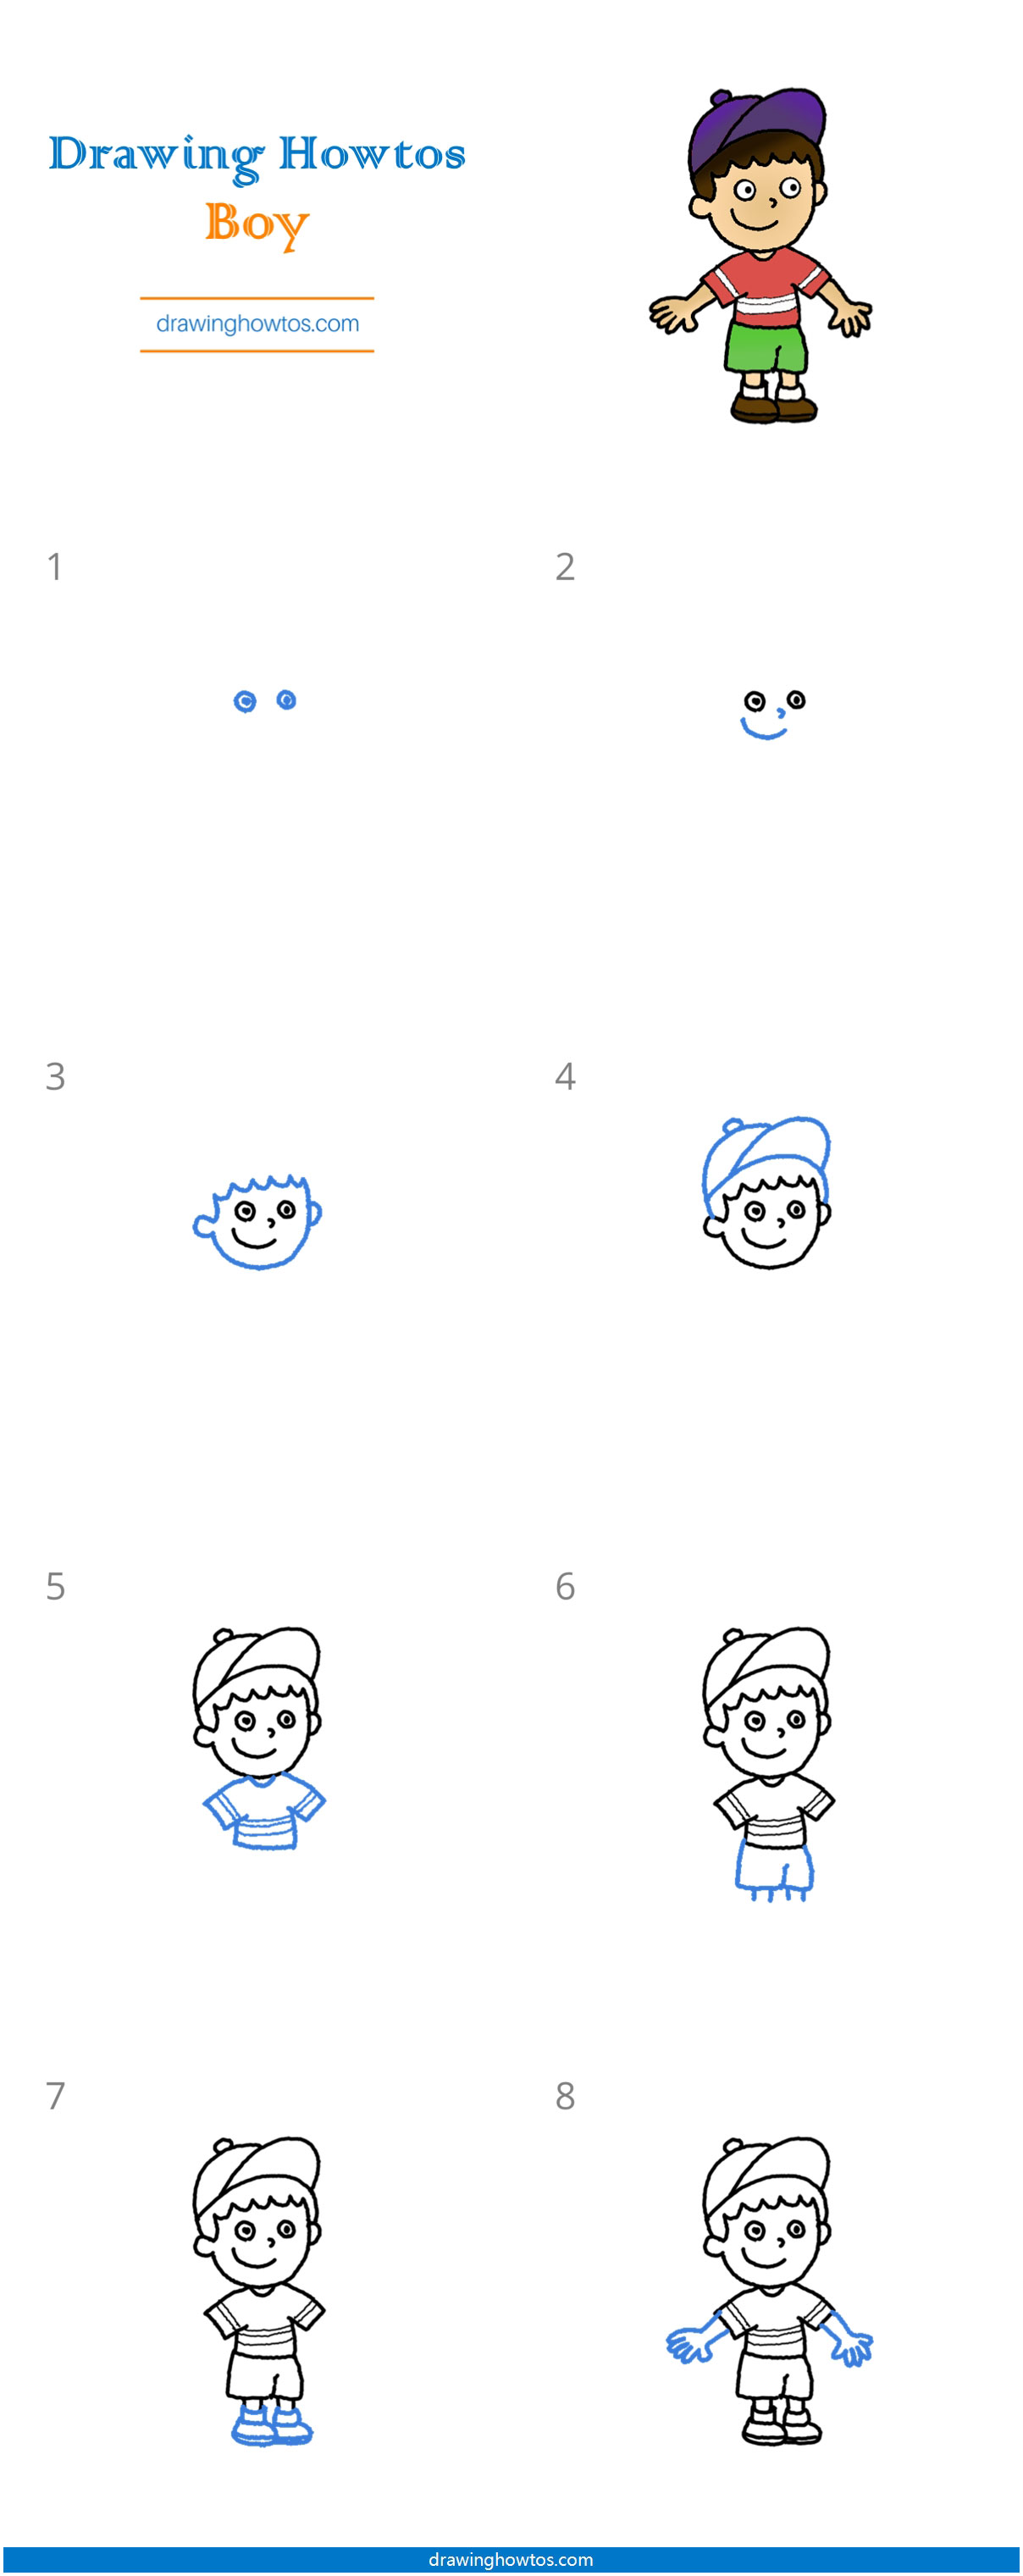 How to Draw a Boy Step by Step